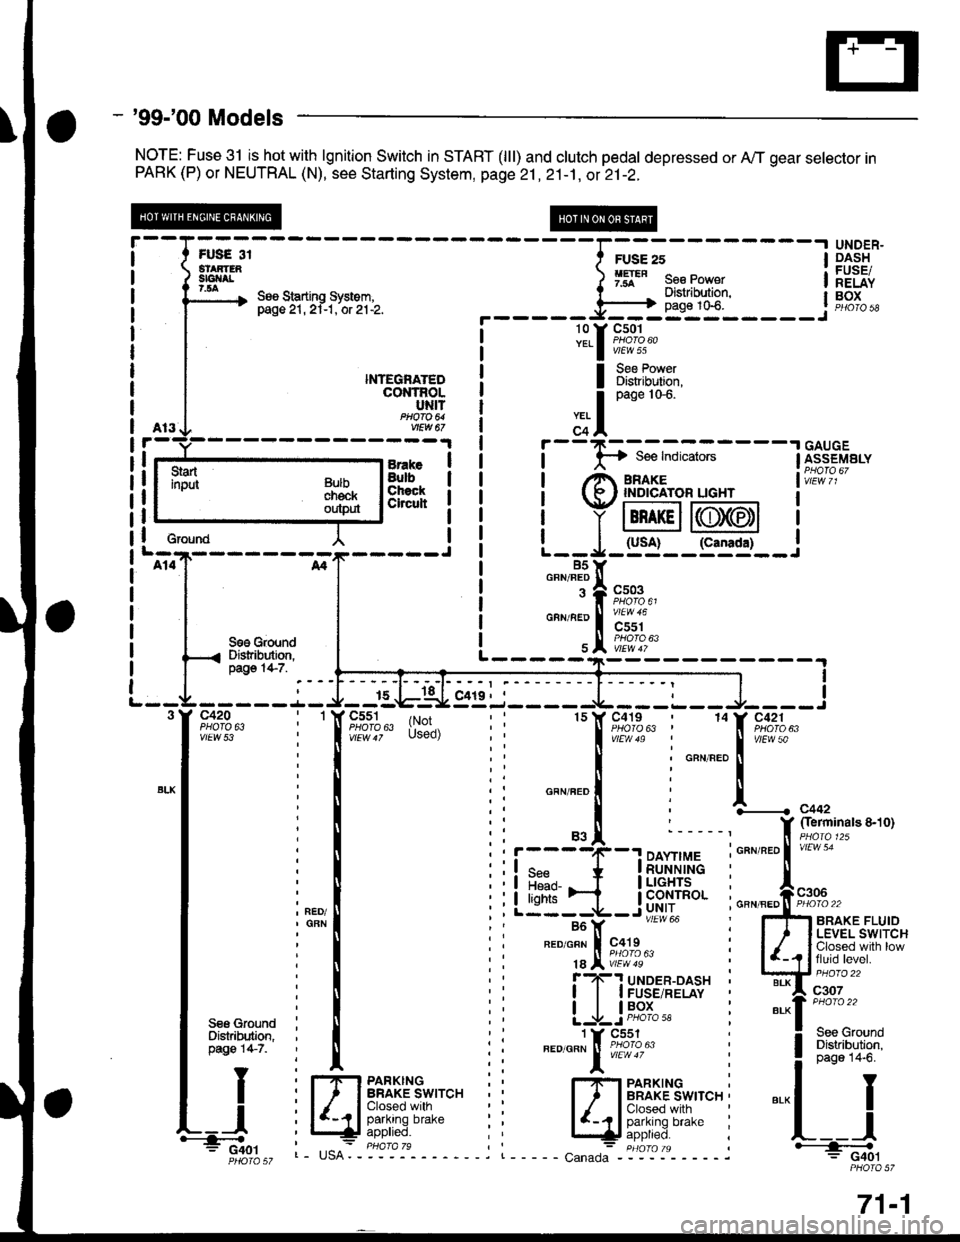 HONDA CIVIC 1998 6.G User Guide - 99-00 Models
NOTE: Fuse 31 isJtot with lgnition Switch in START (lll) and clutch pedal depressed or A,,/T gear selector inPARK (P) or NEUTRAL (N), see Starting System, page 21 ,2i-1, ot 21-2.
UNDE